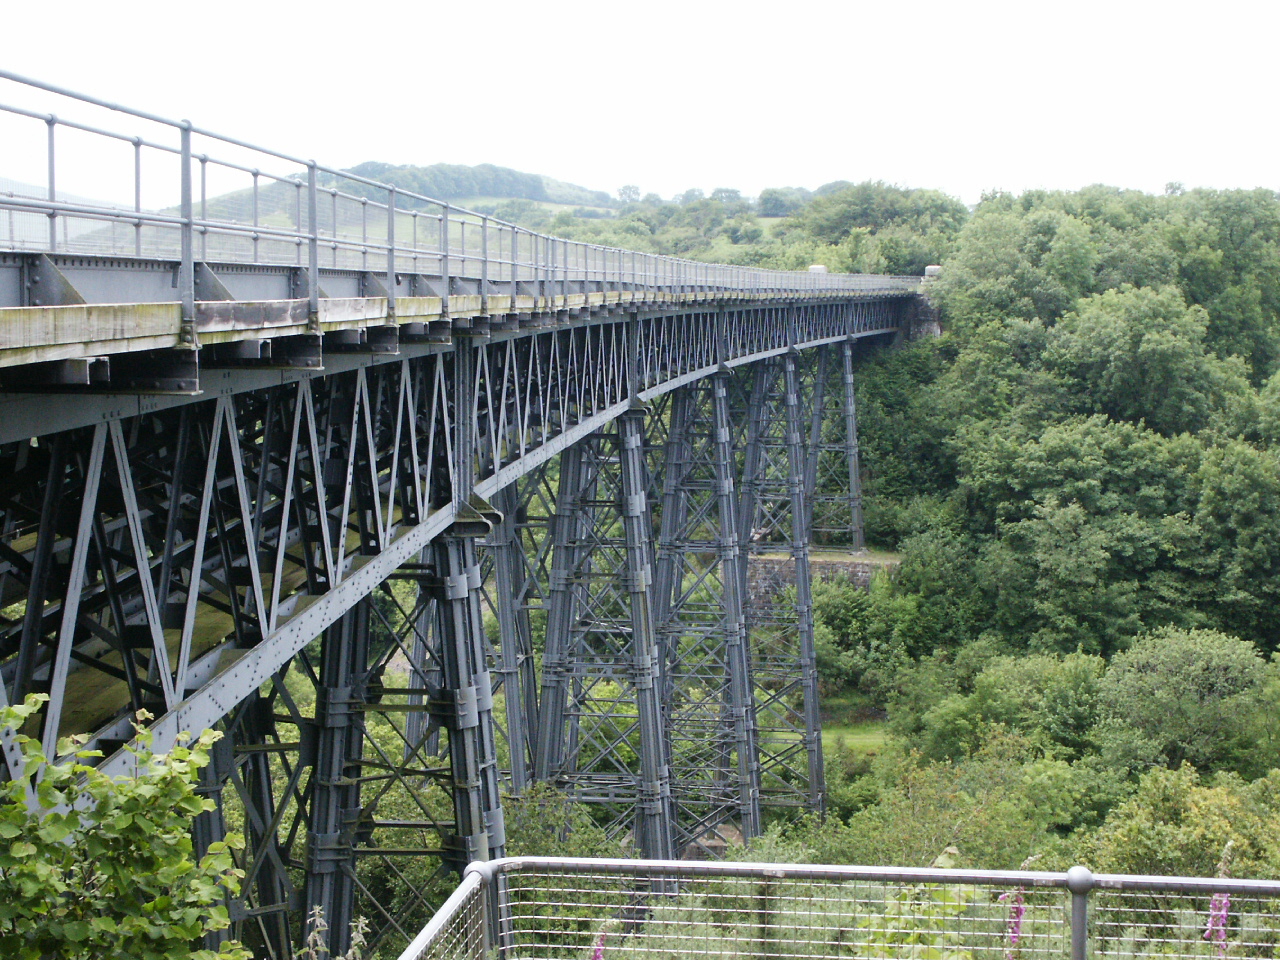 a train crosses over a metal bridge above some trees